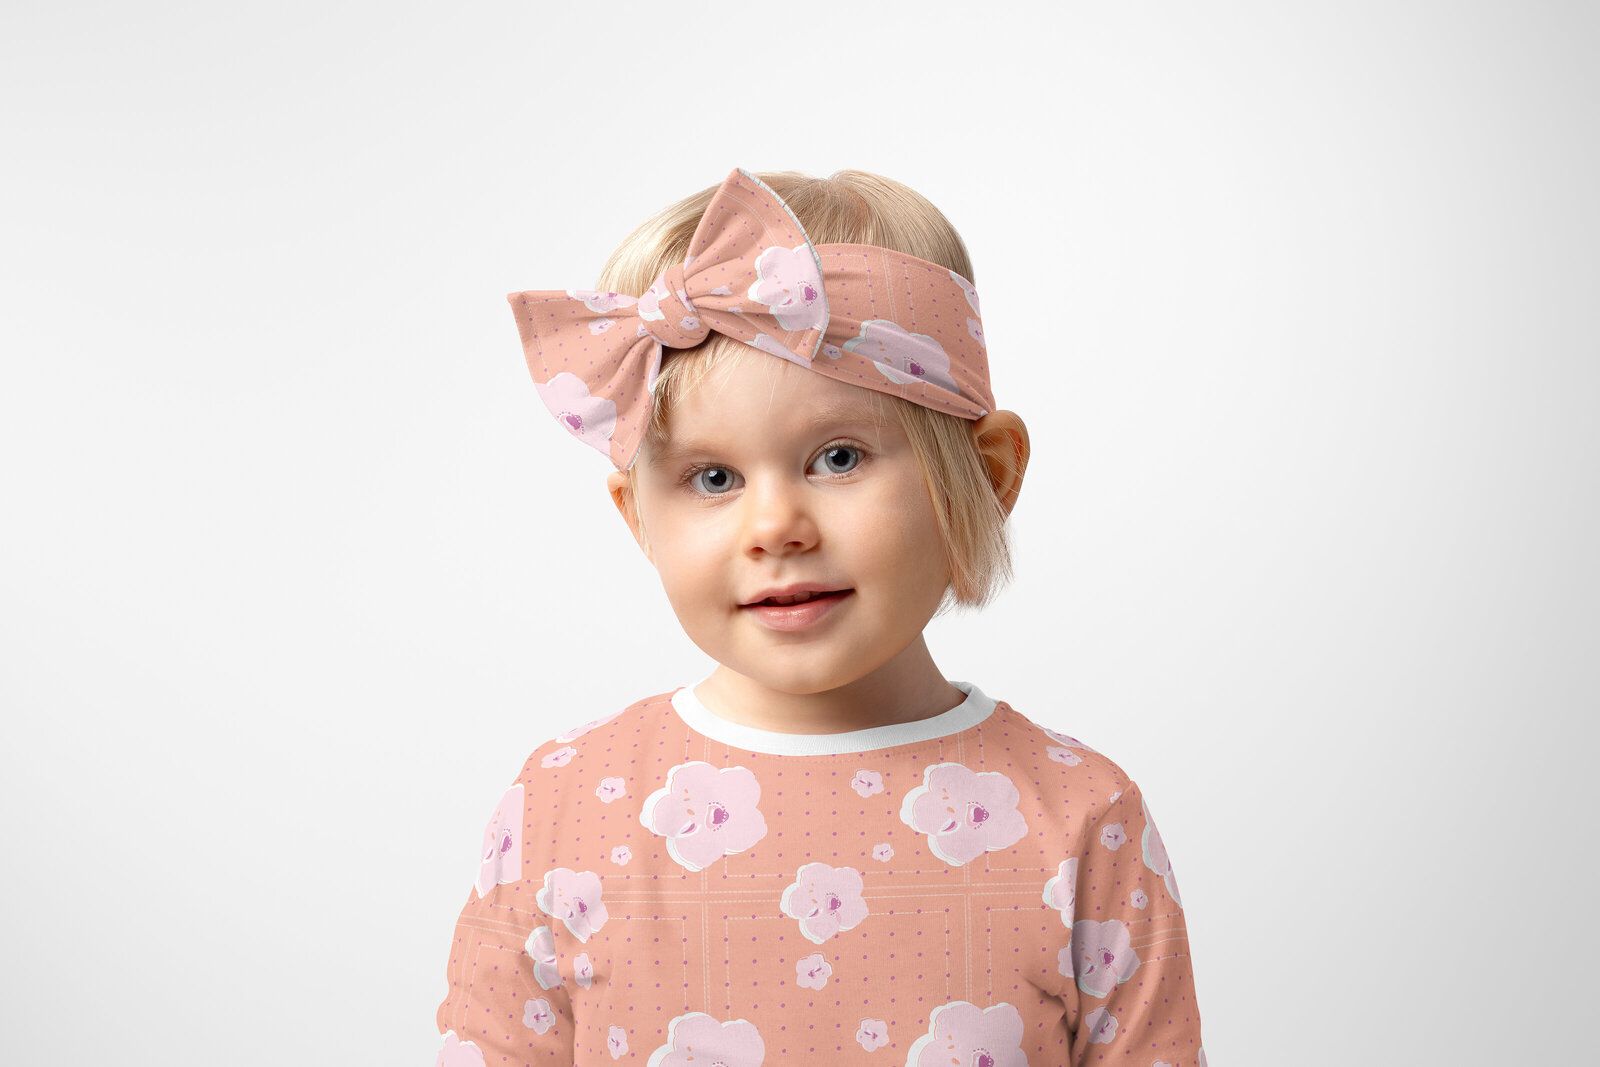 pink and white patterned fabric headband and childrens shirt